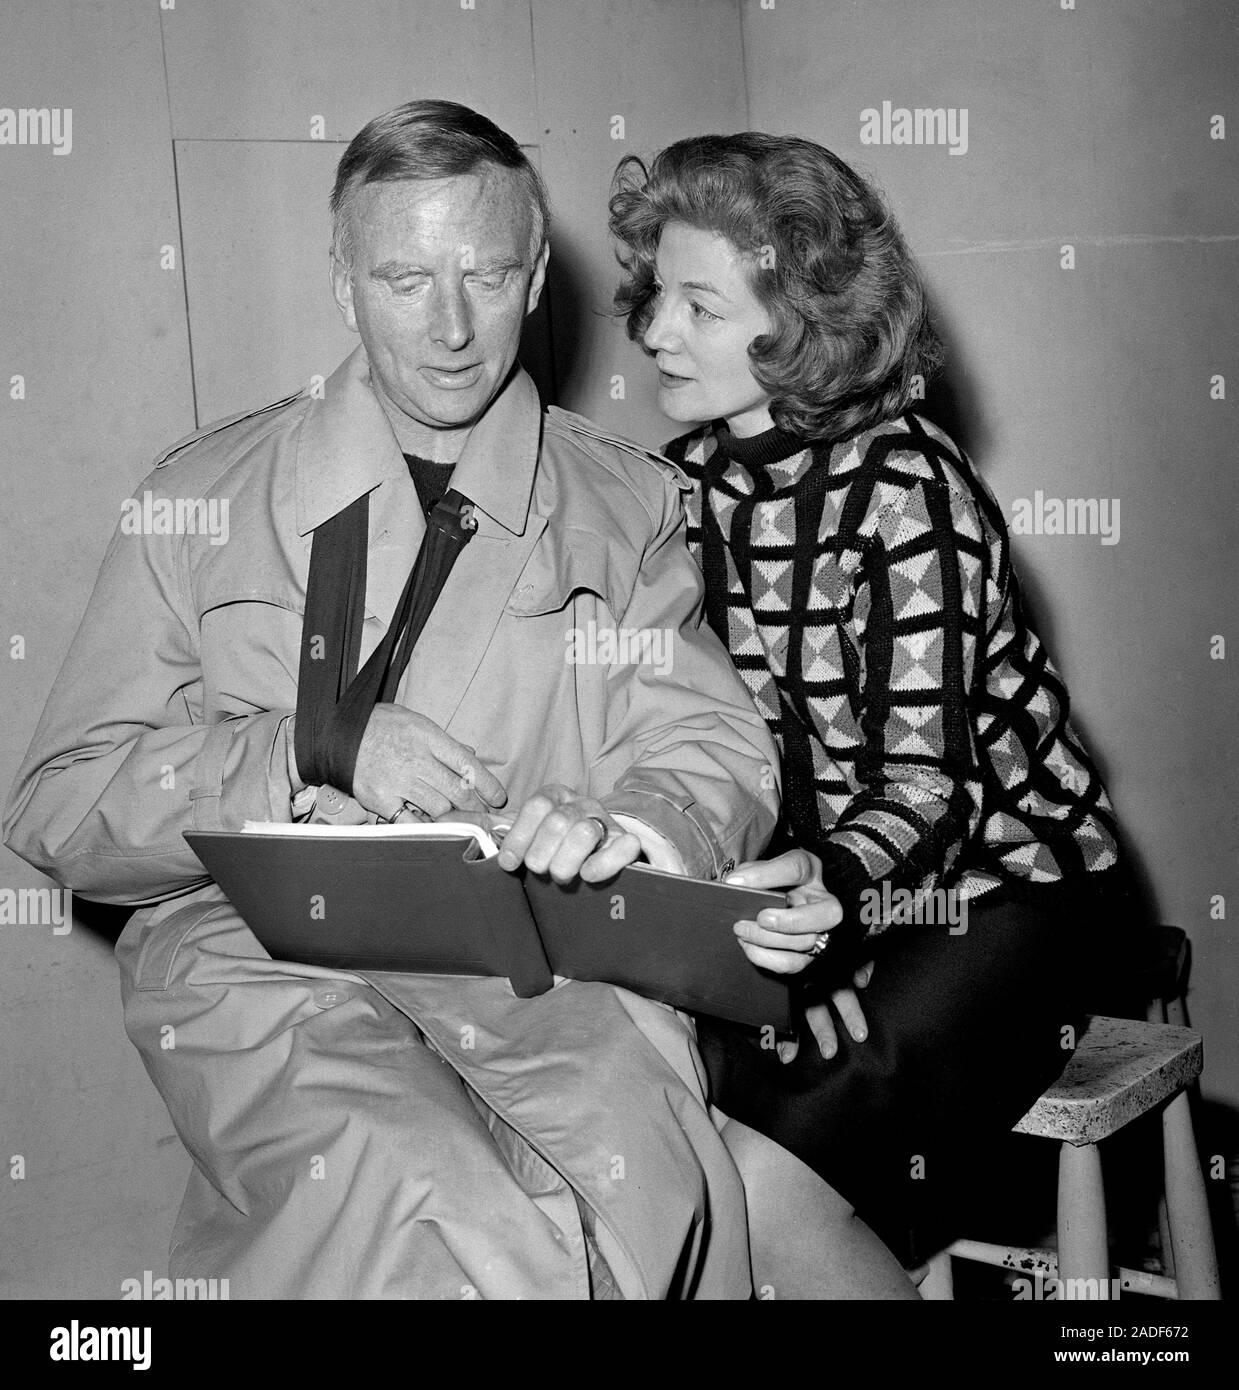 Sarah Churchill, actress daughter of Sir Winston Churchill, goes over the script with her husband, Lord Audley, author of the play 'From This Hill', during rehearsals in London. Lord Audley, recovering from a collarbone injury, has his arm in a sling. Stock Photo